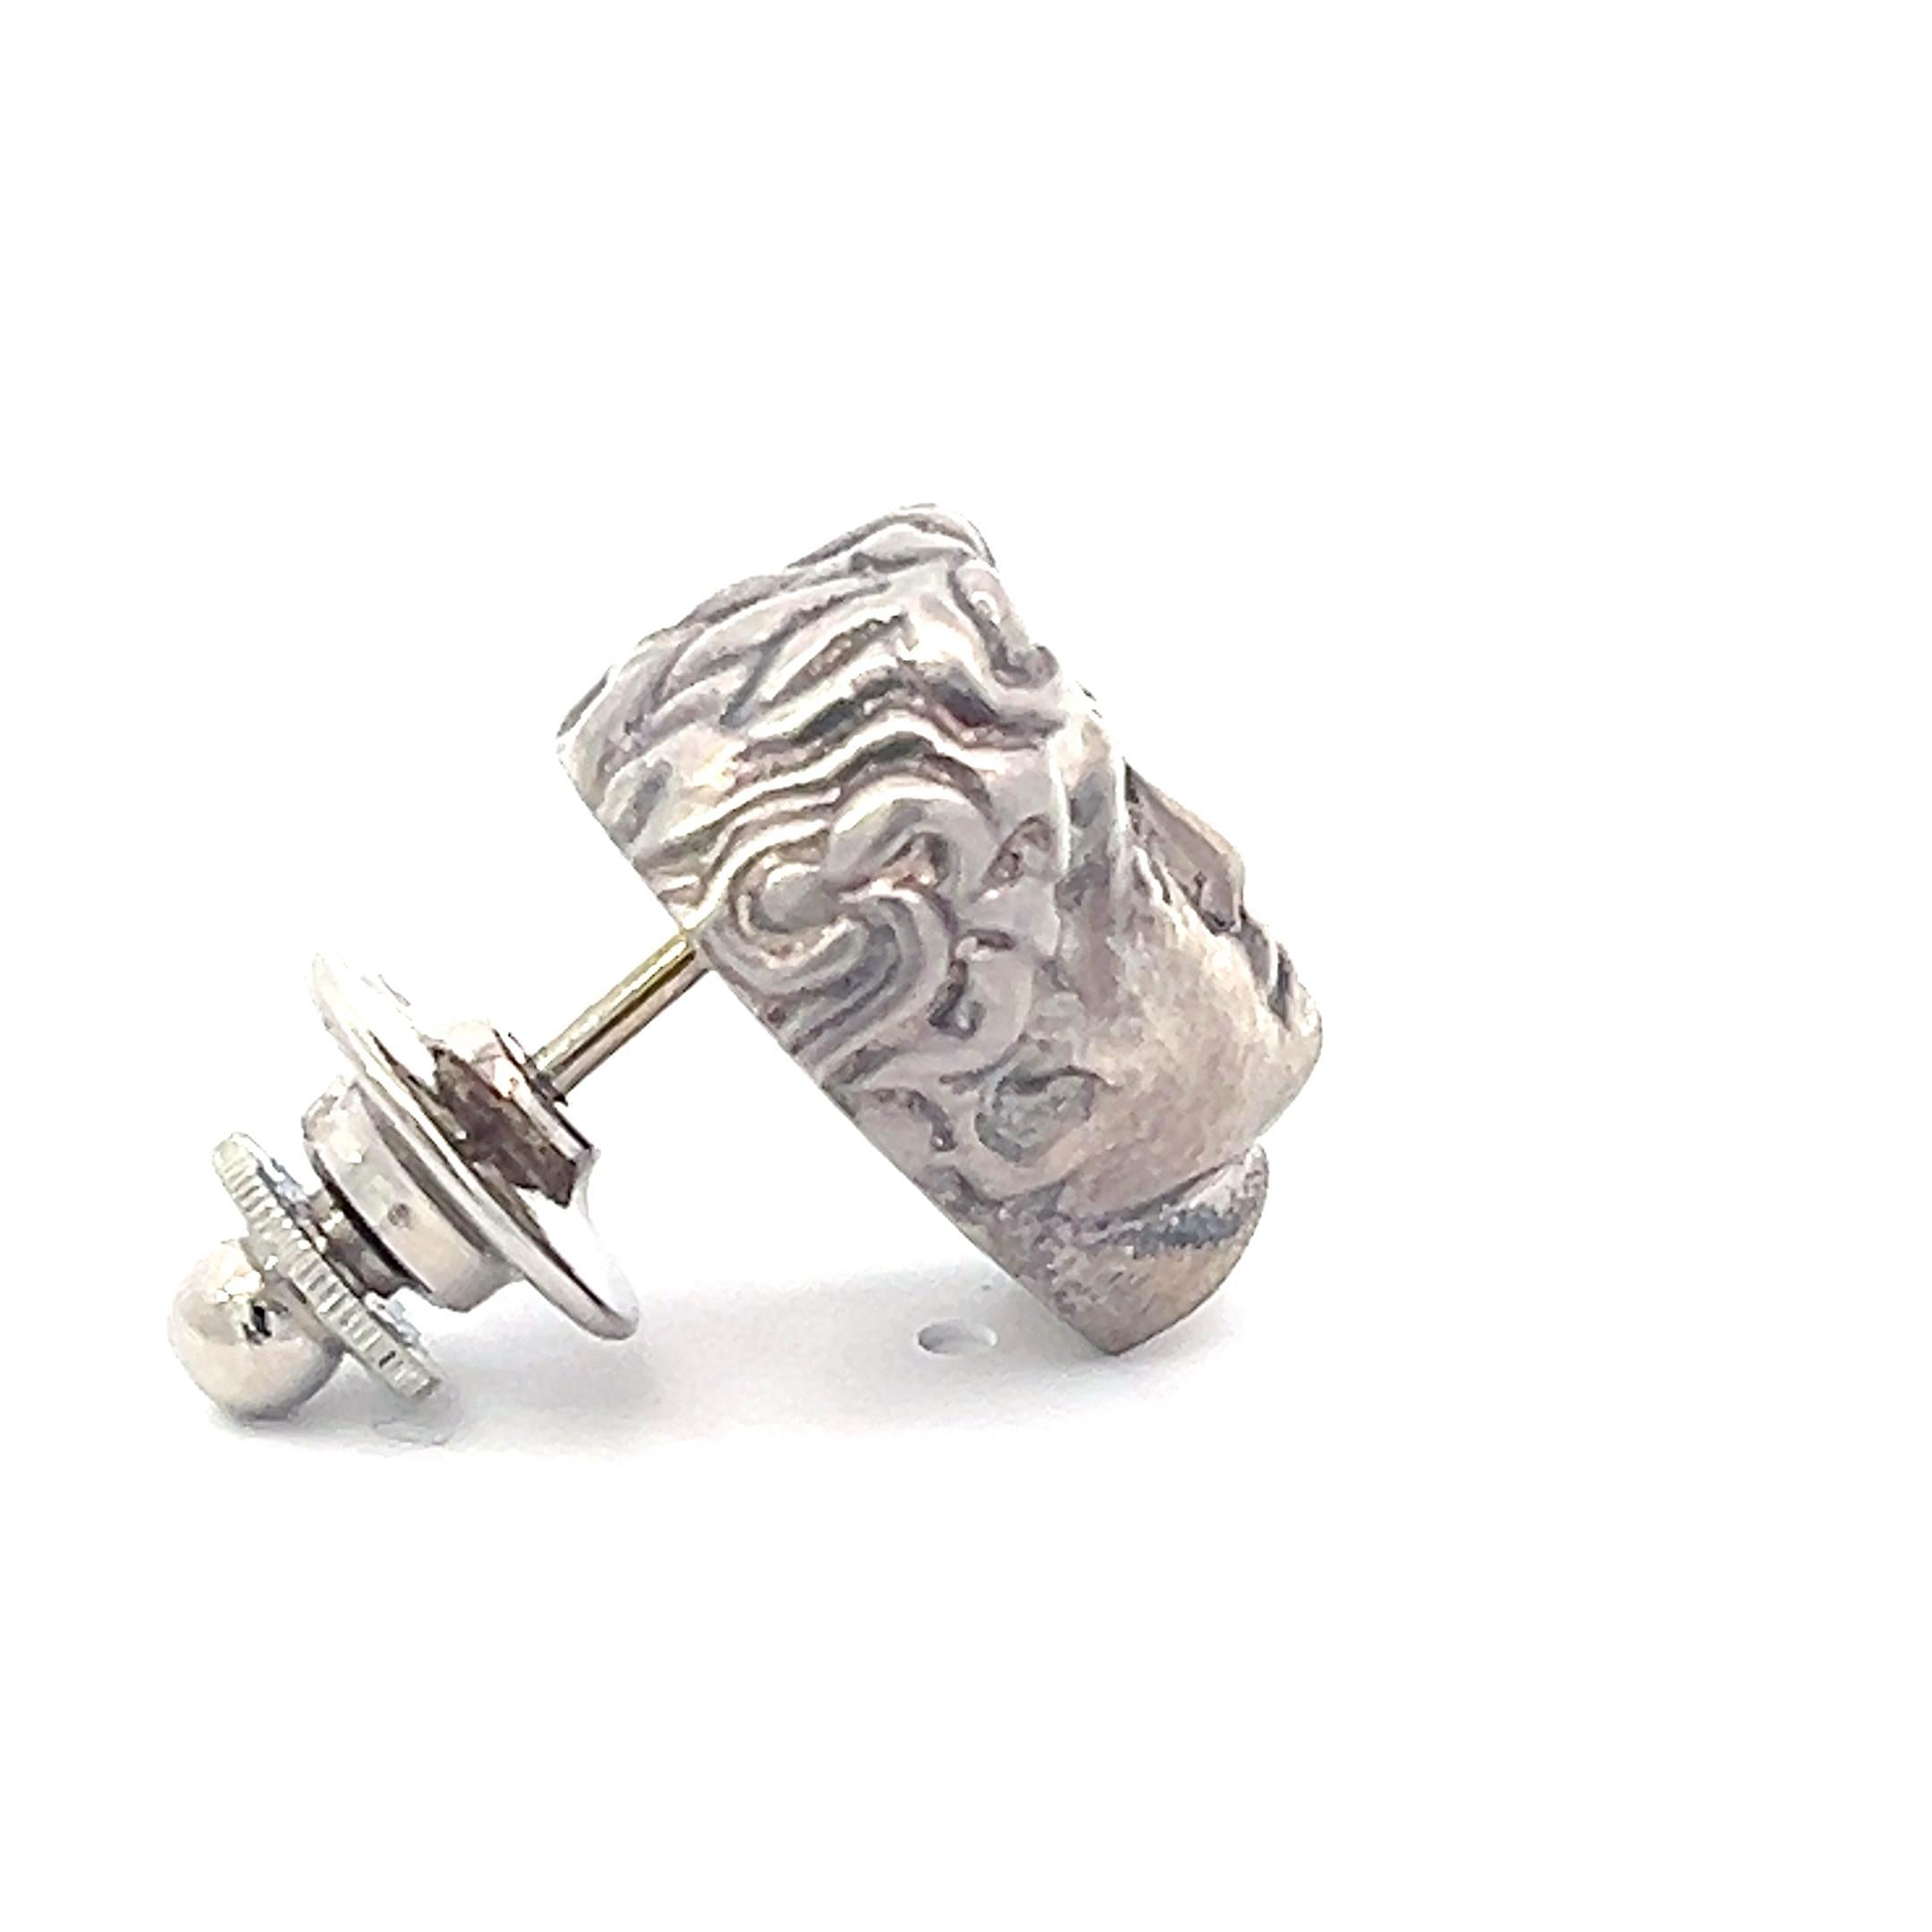 Embrace iconic artistry with our Sterling Silver David Head Lapel Pin/Tie Tack. Meticulously crafted, this accessory captures the timeless beauty of Michelangelo's David, showcasing the iconic head in exquisite detail. Cast in sterling silver, the